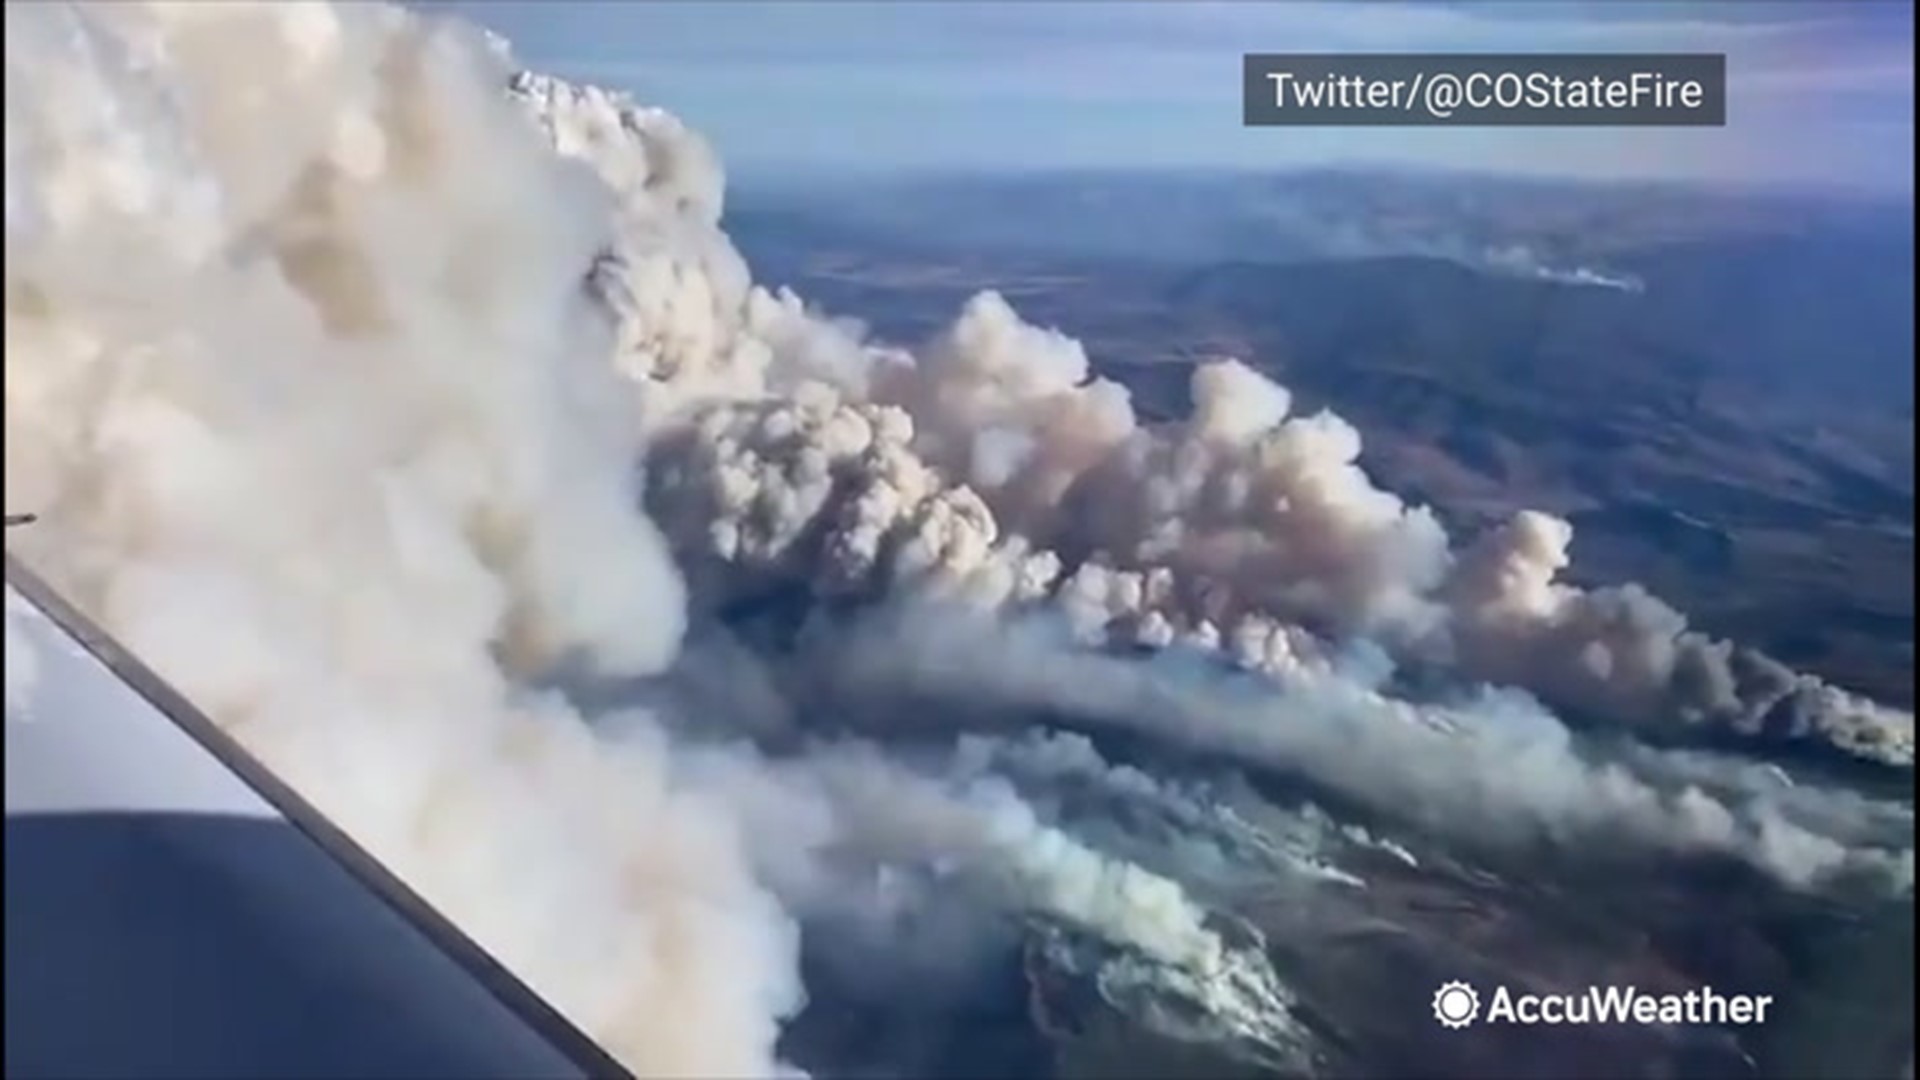 Aerial footage captured over the East Troublesome Fire in Colorado shows smoke billowing into the sky on Oct. 22. The fire has grown to more than 170,000 acres and forced residents in the area to evacuate.